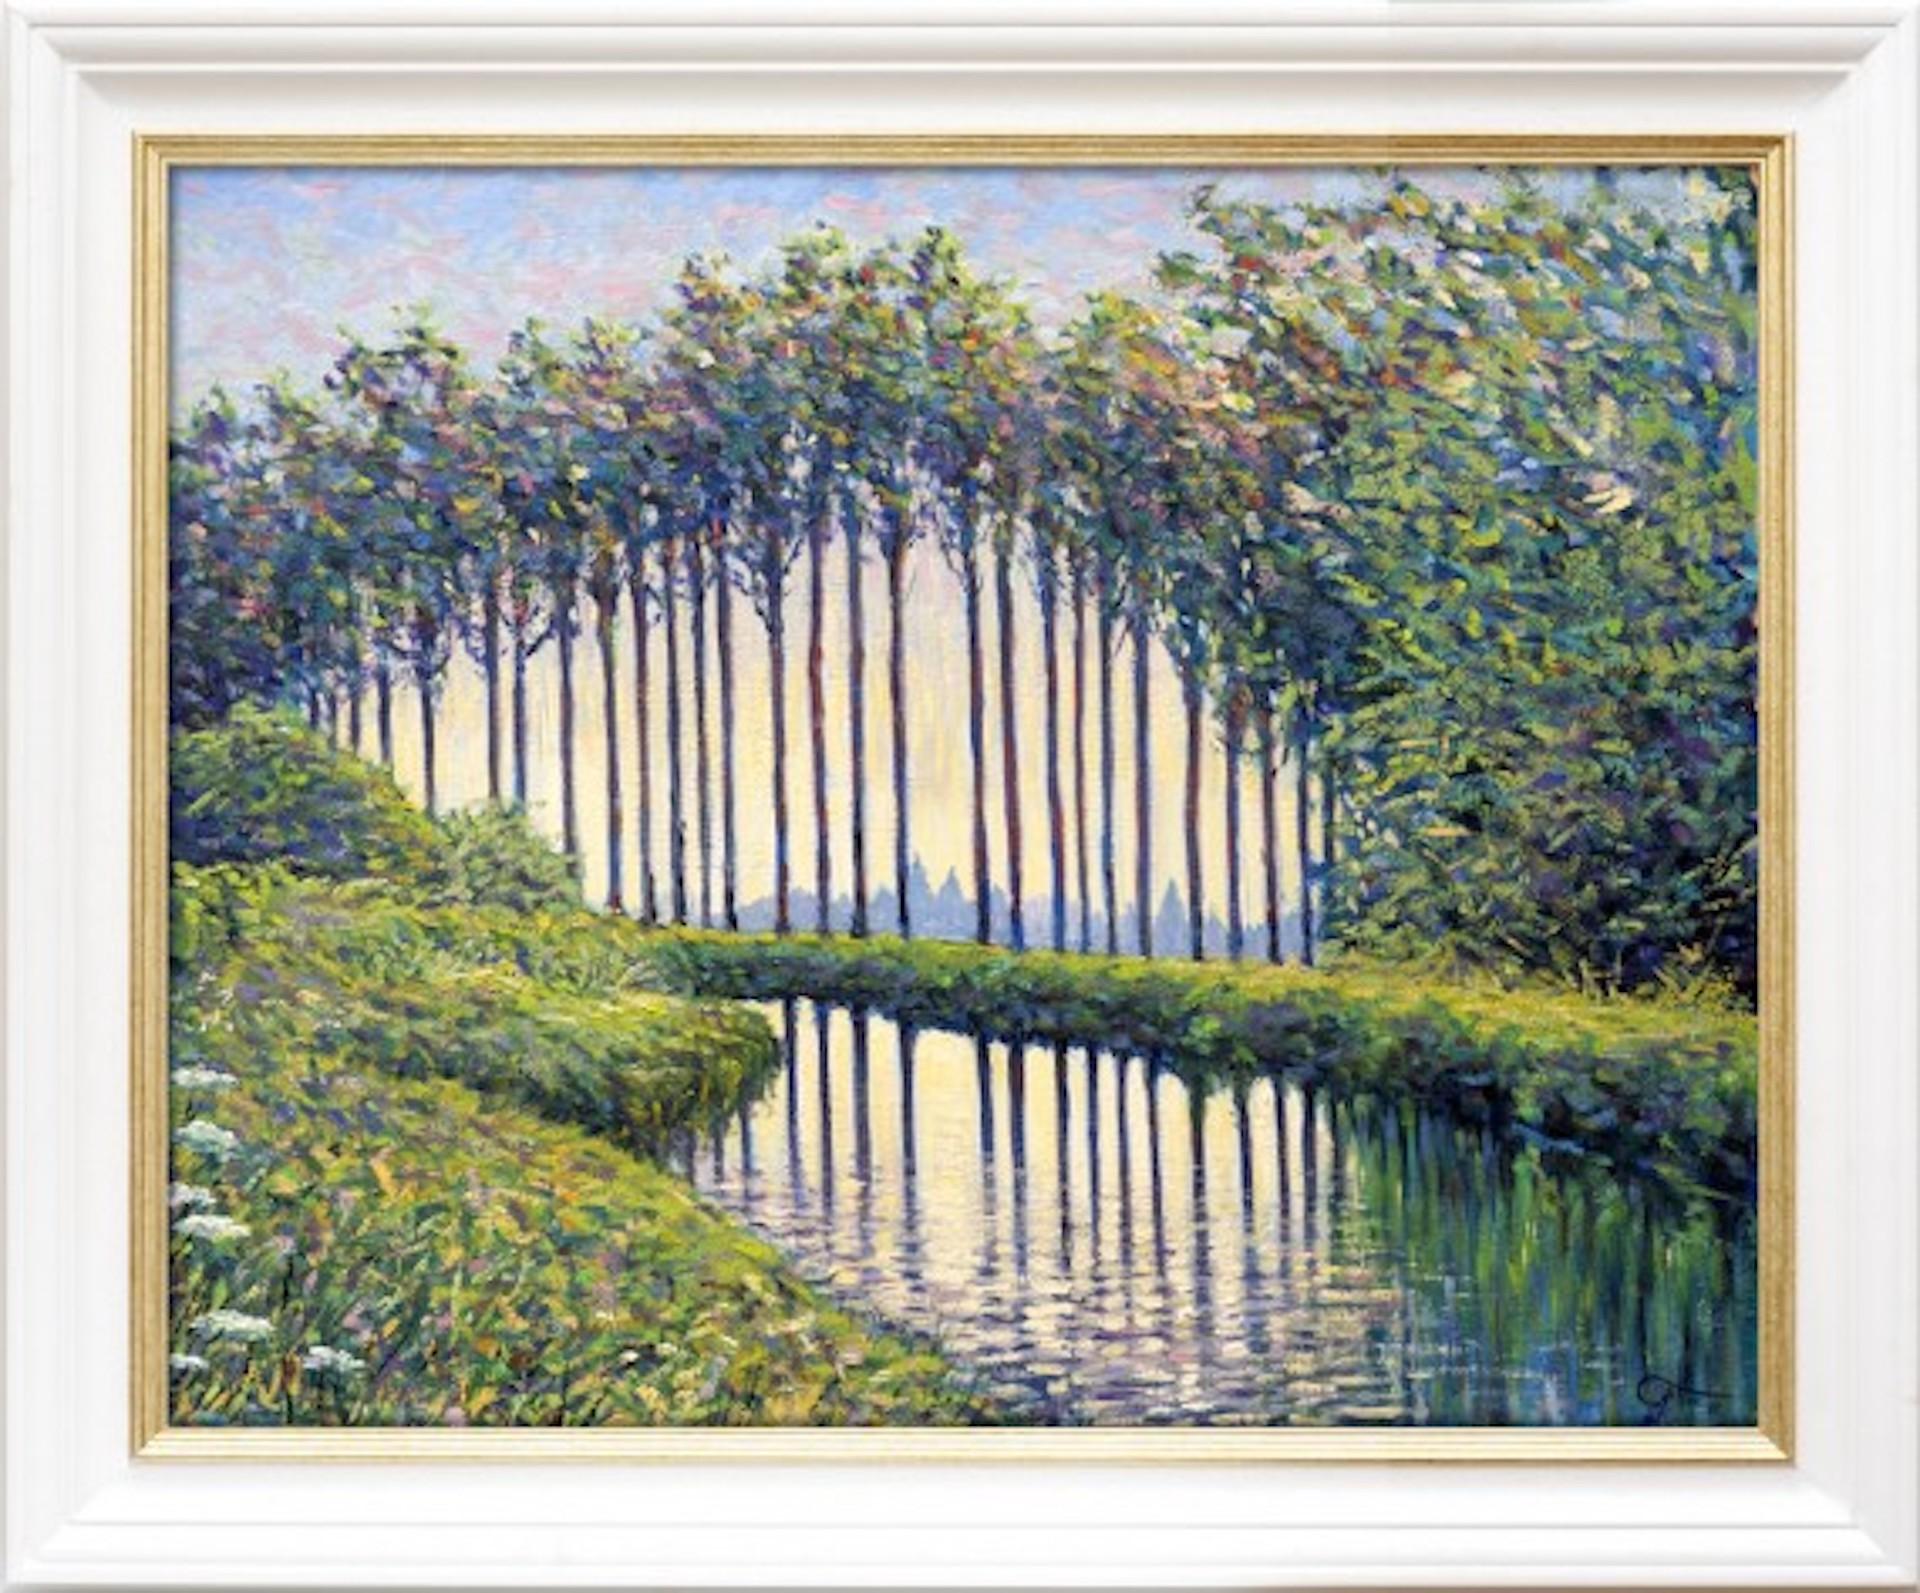 and the bridge is love (crossing over) [2021]

original
Oil on stretched canvas
Image size: H:61 cm x W:76 cm
Complete Size of Unframed Work: H:61 cm x W:76 cm x D:1.8cm
Sold Unframed
Please note that insitu images are purely an indication of how a